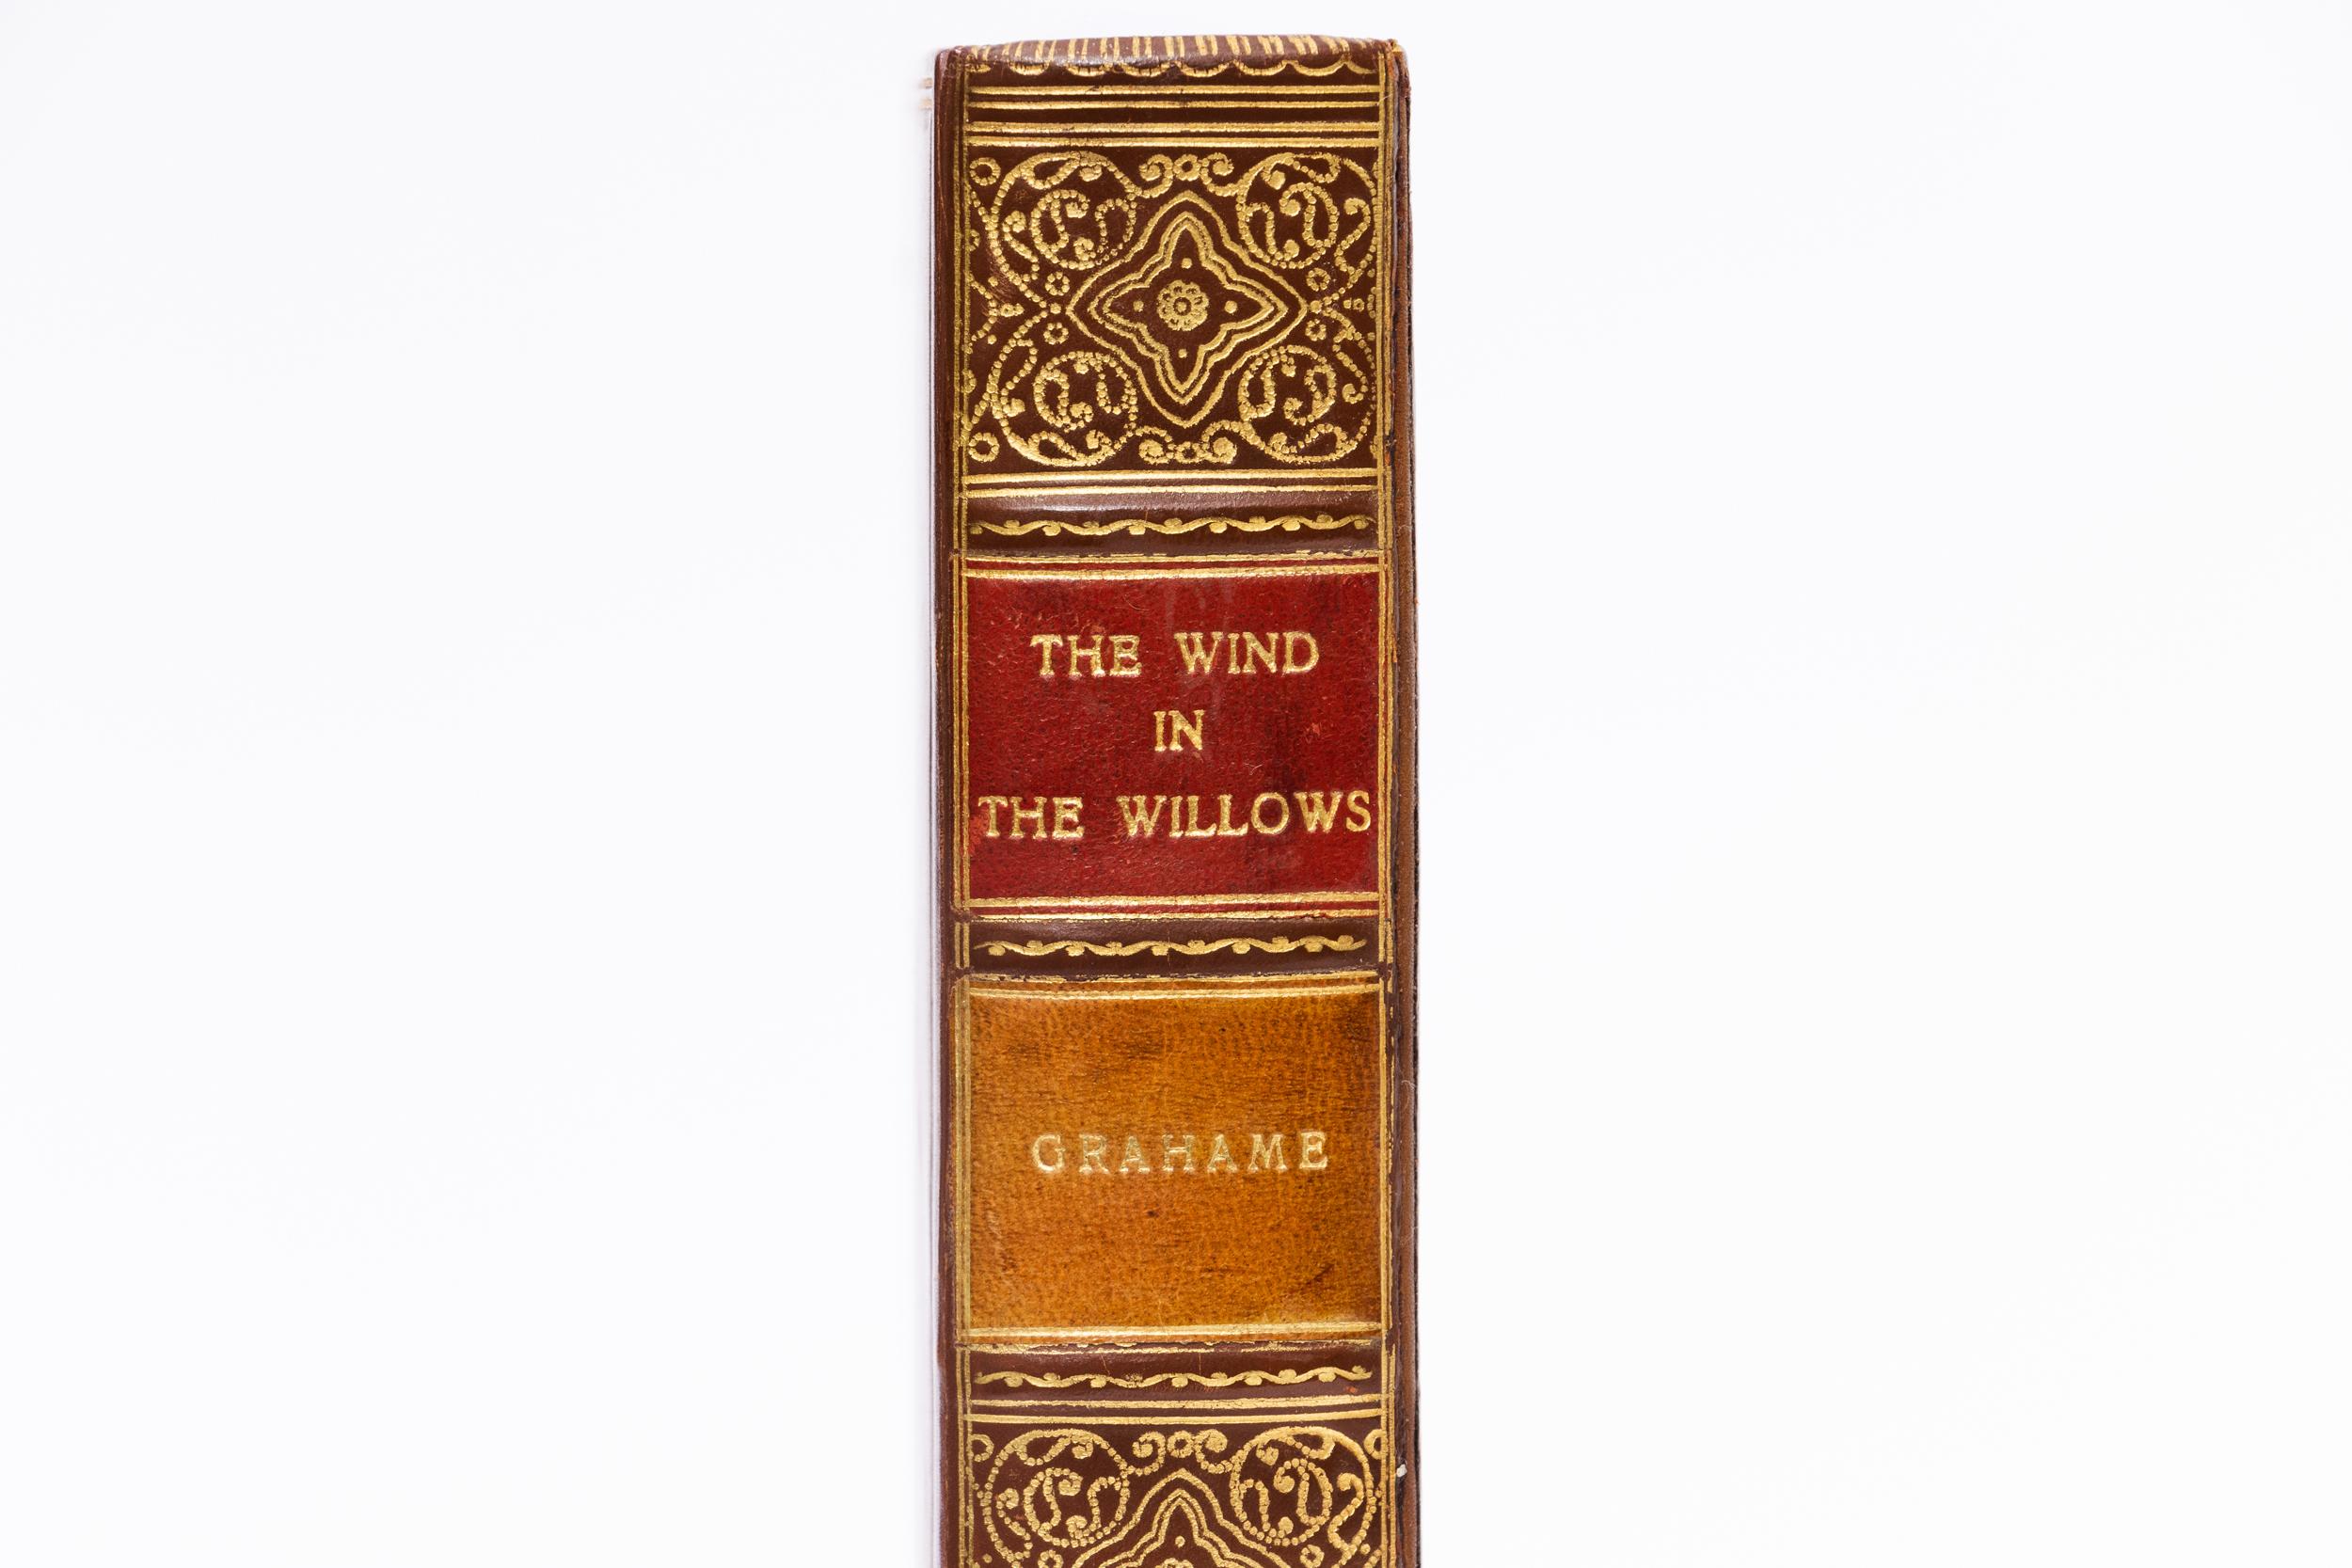 20th Century 1 Volume, Kenneth Grahame, The Wind in The Willows